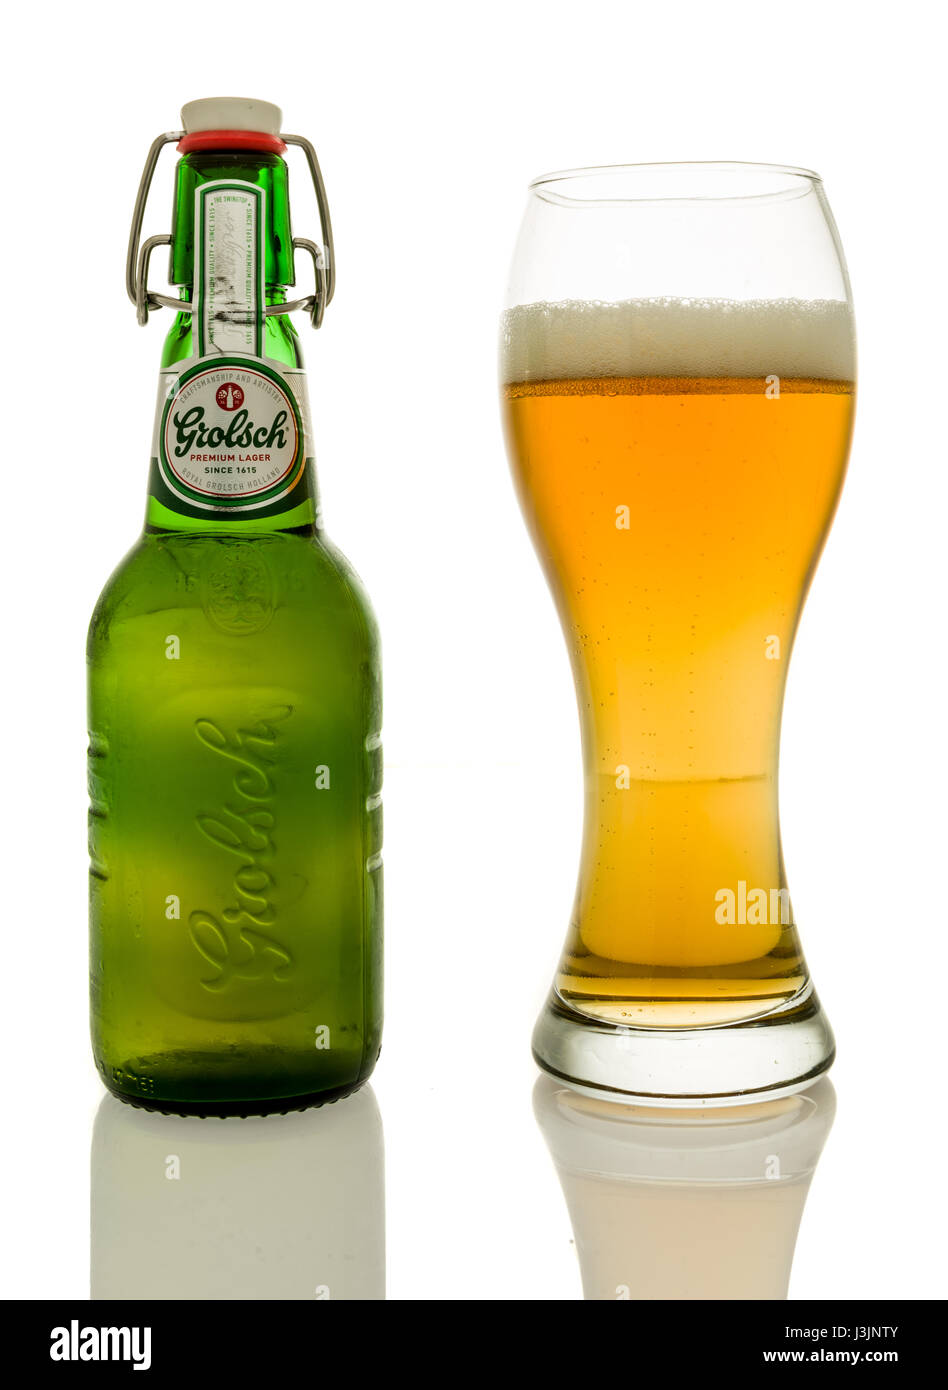 Winneconne, WI - 28 April 2017: A bottle of Grolsch premium lager beer with a glass on an isolated background. Stock Photo